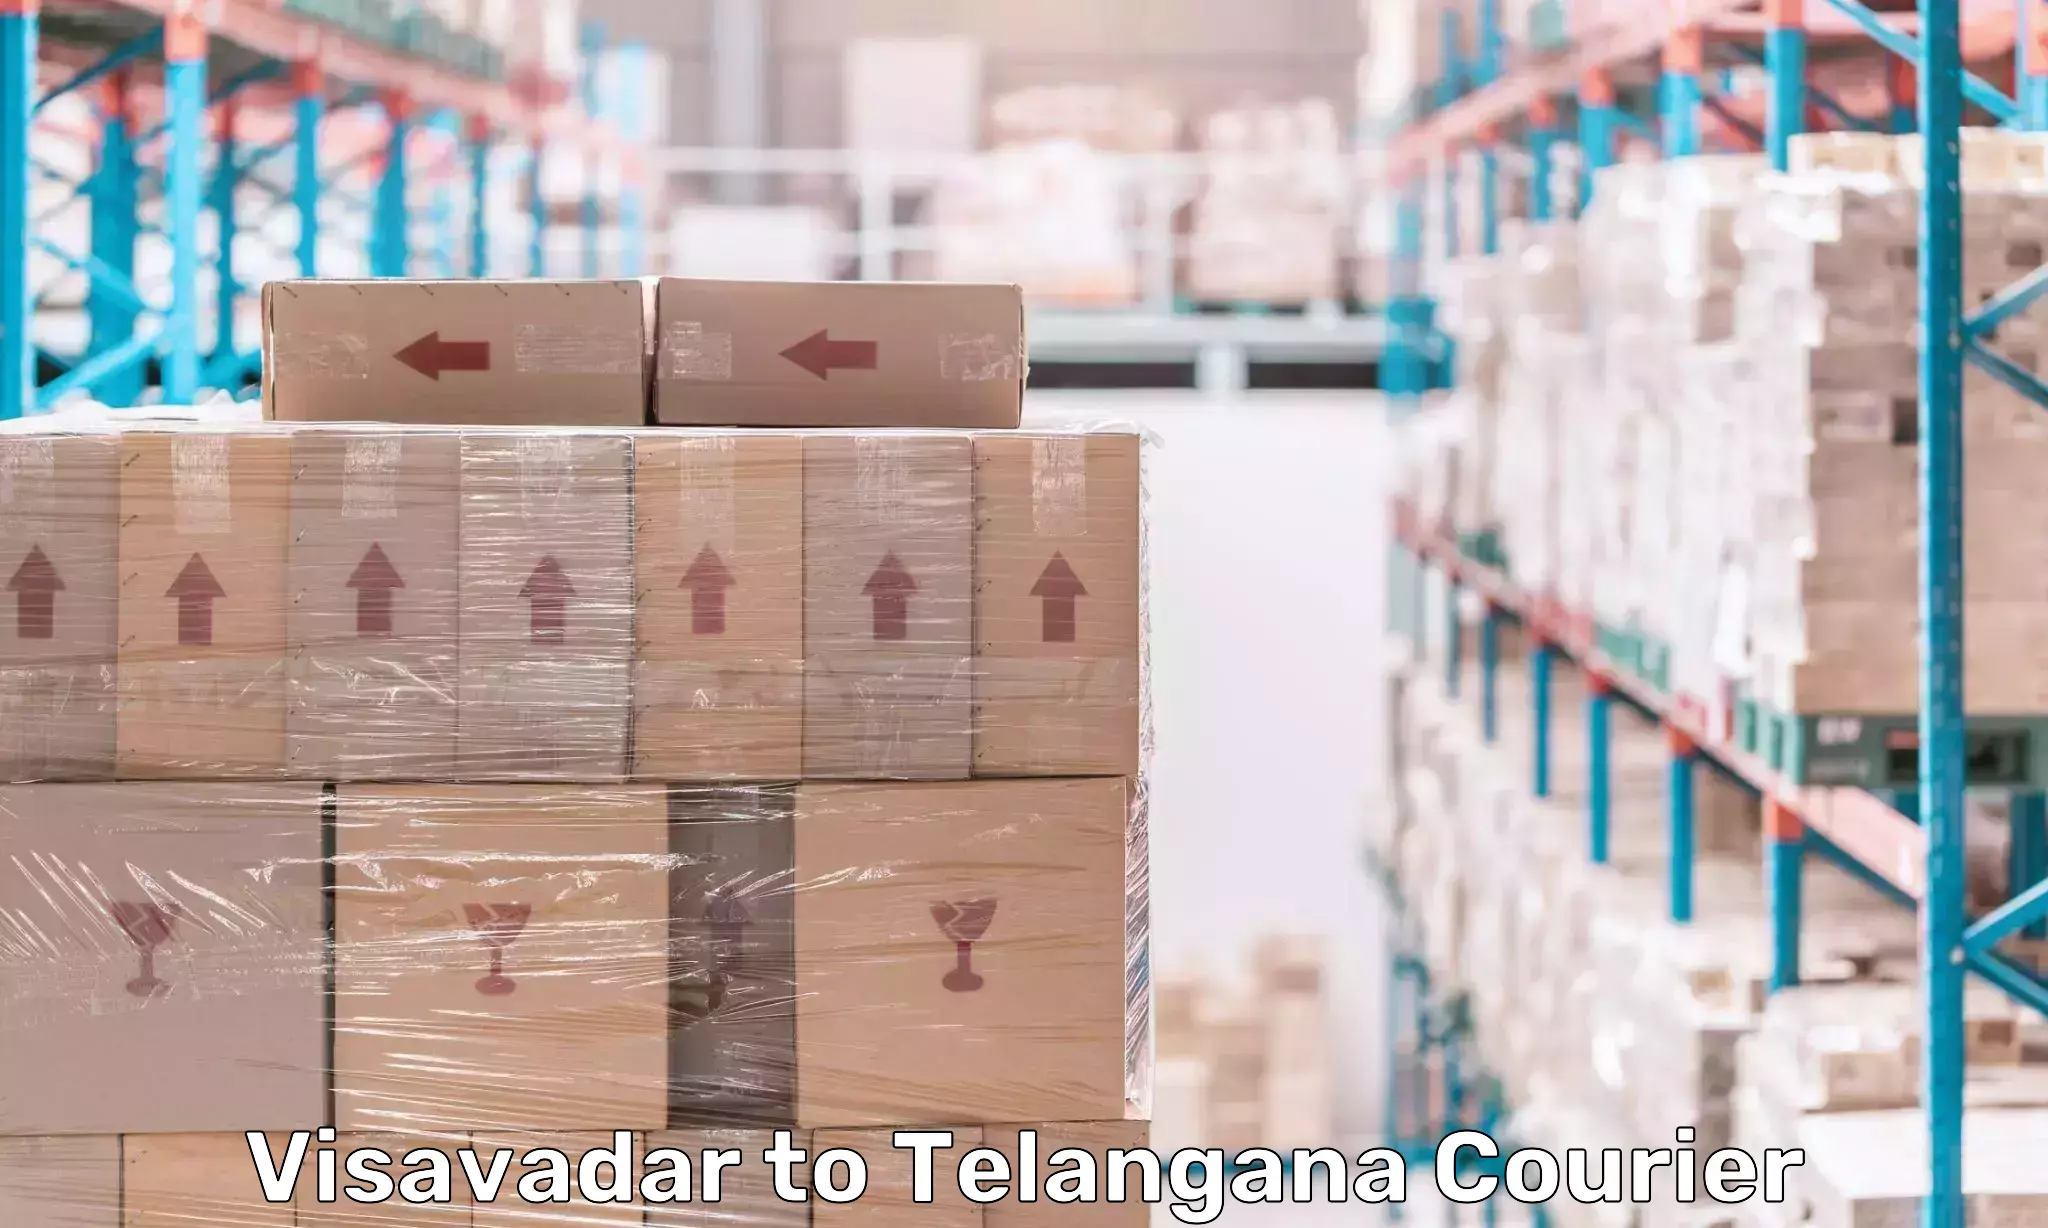 Multi-national courier services Visavadar to Ghanpur